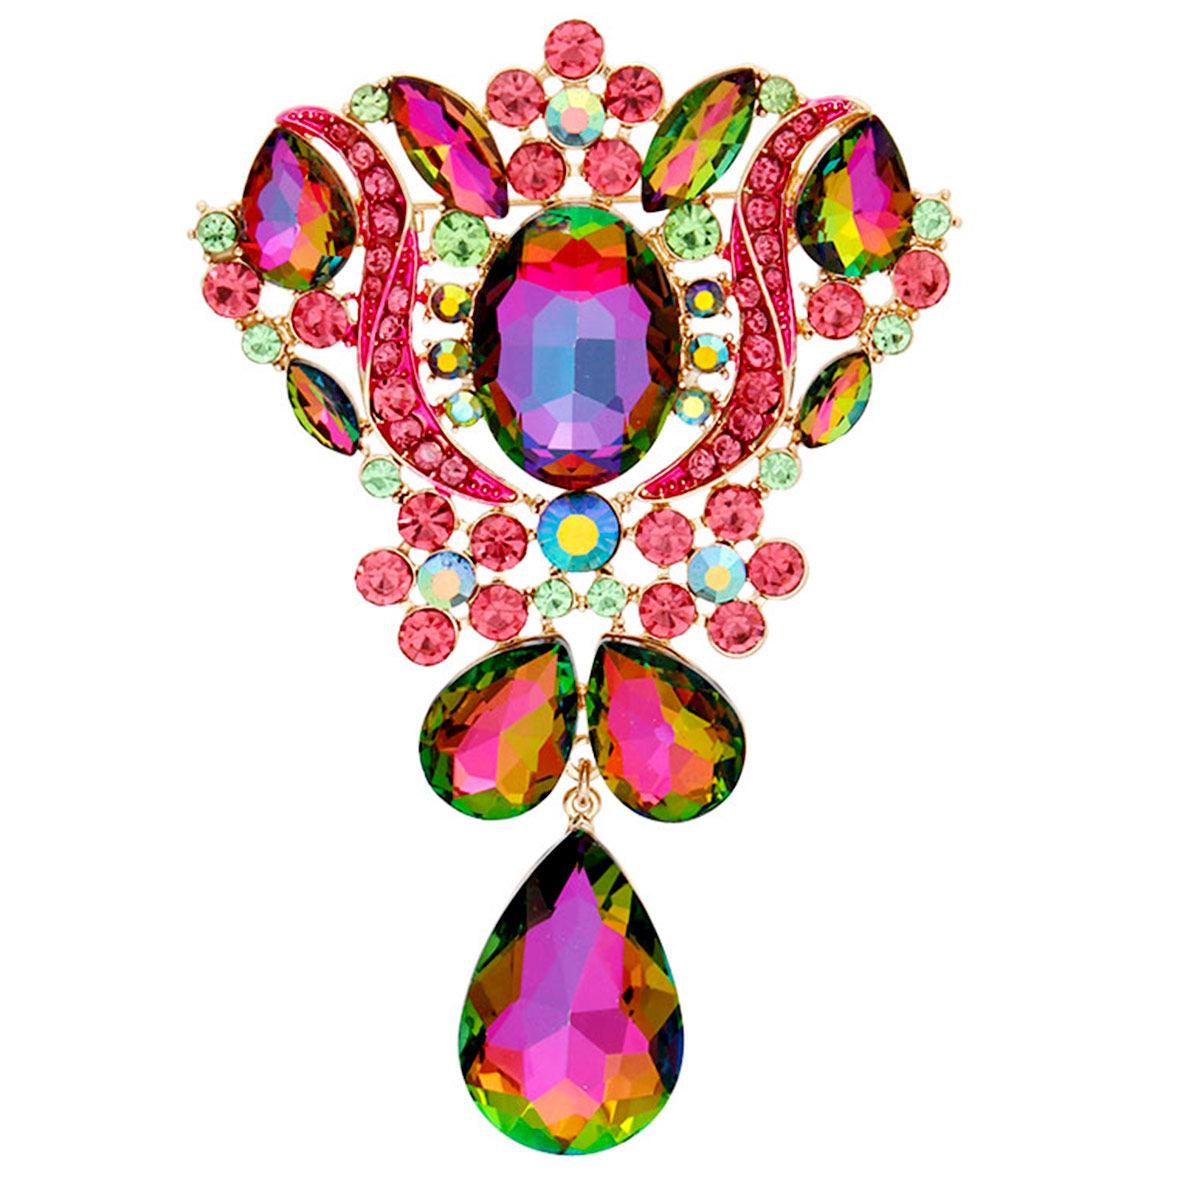 Pinks & Greens Statement Brooch - Standout Fashion Accessory